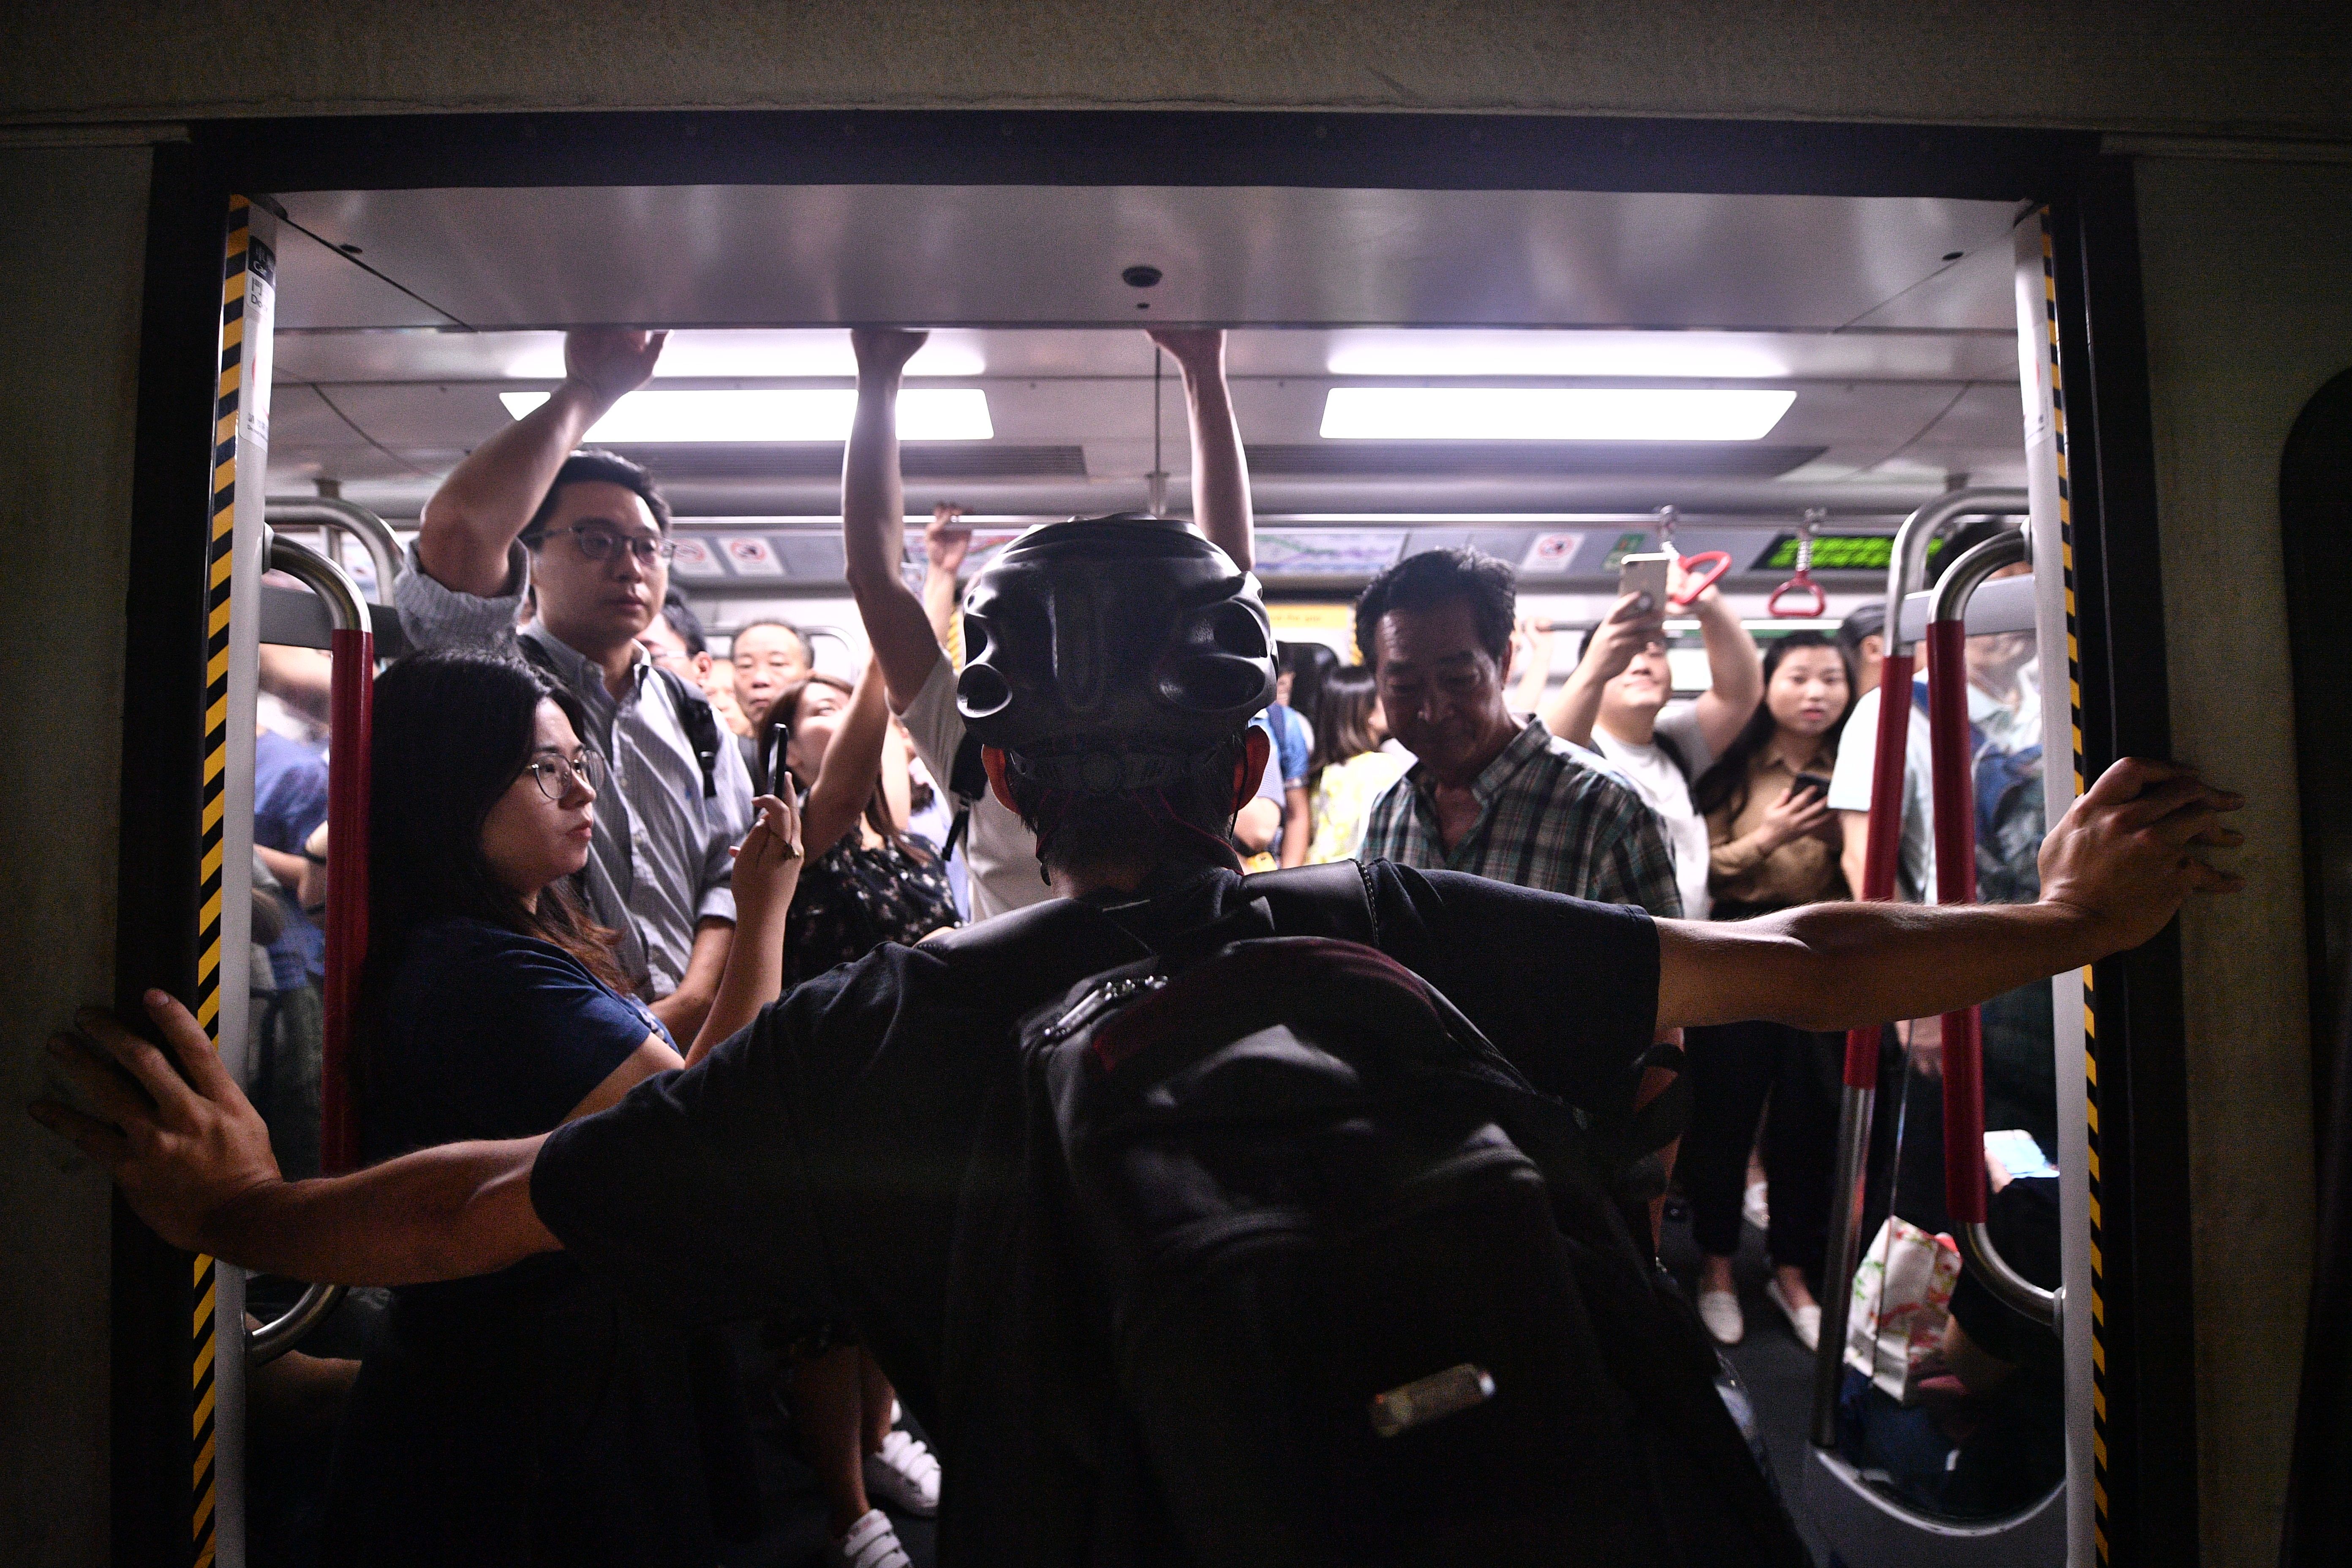 Protesters blocking the train doors at Fortress Hill station in Hong Kong on August 5, 2019.